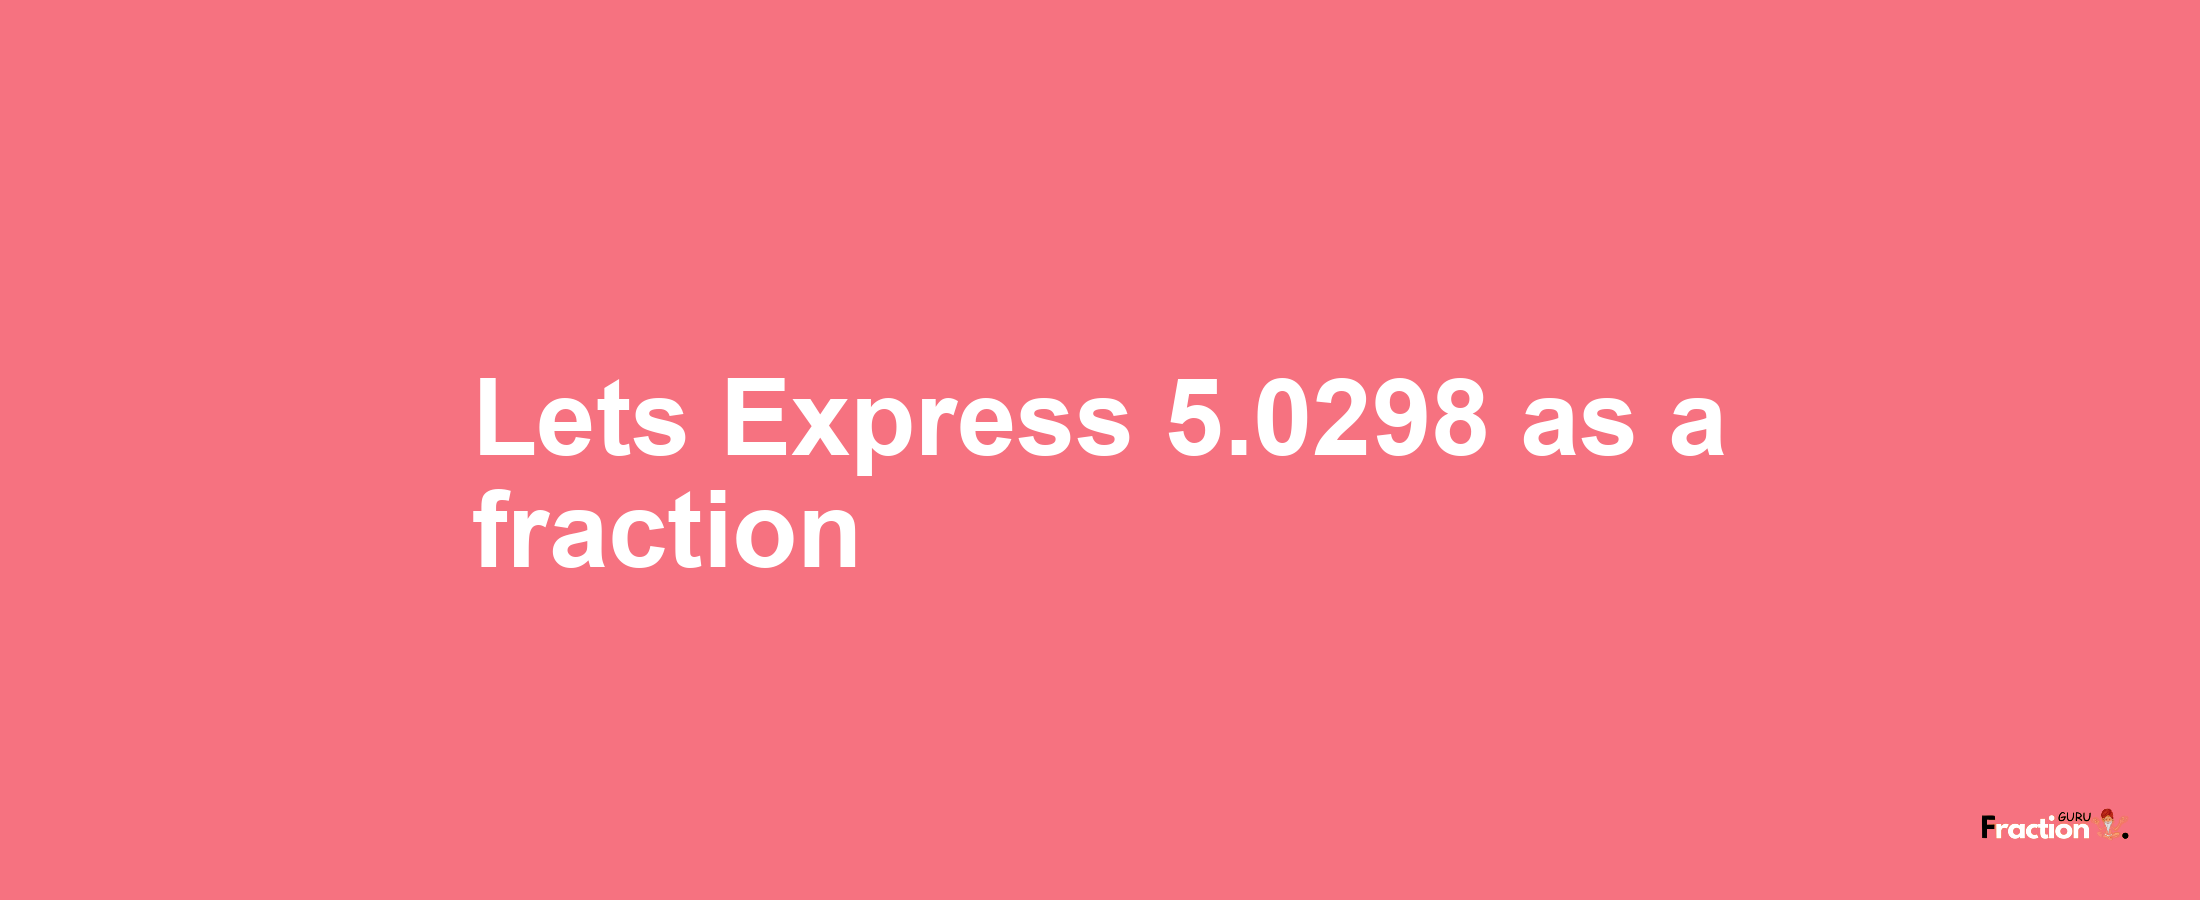 Lets Express 5.0298 as afraction